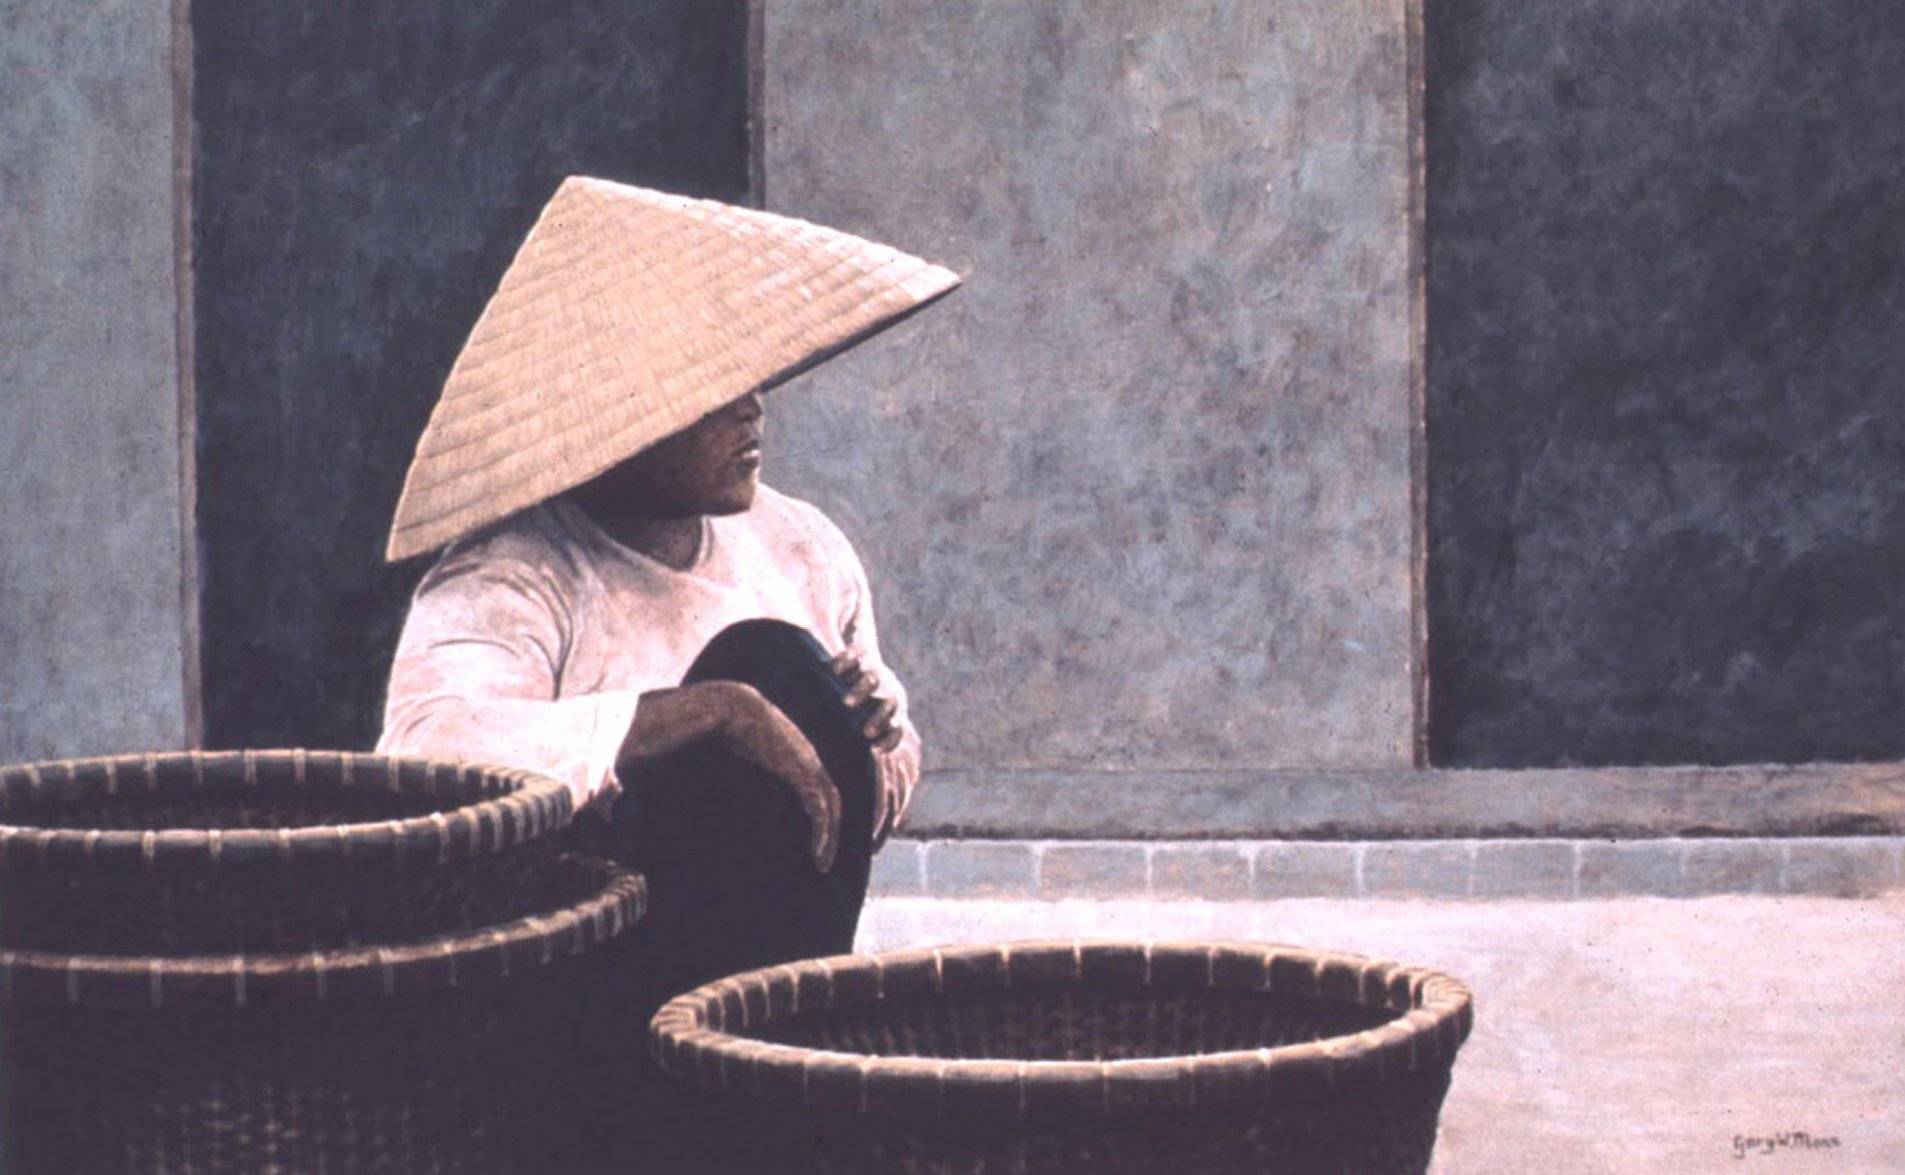 Painting of a Vietnamese vendor crouched down by baskets, wearing a conical straw hat.